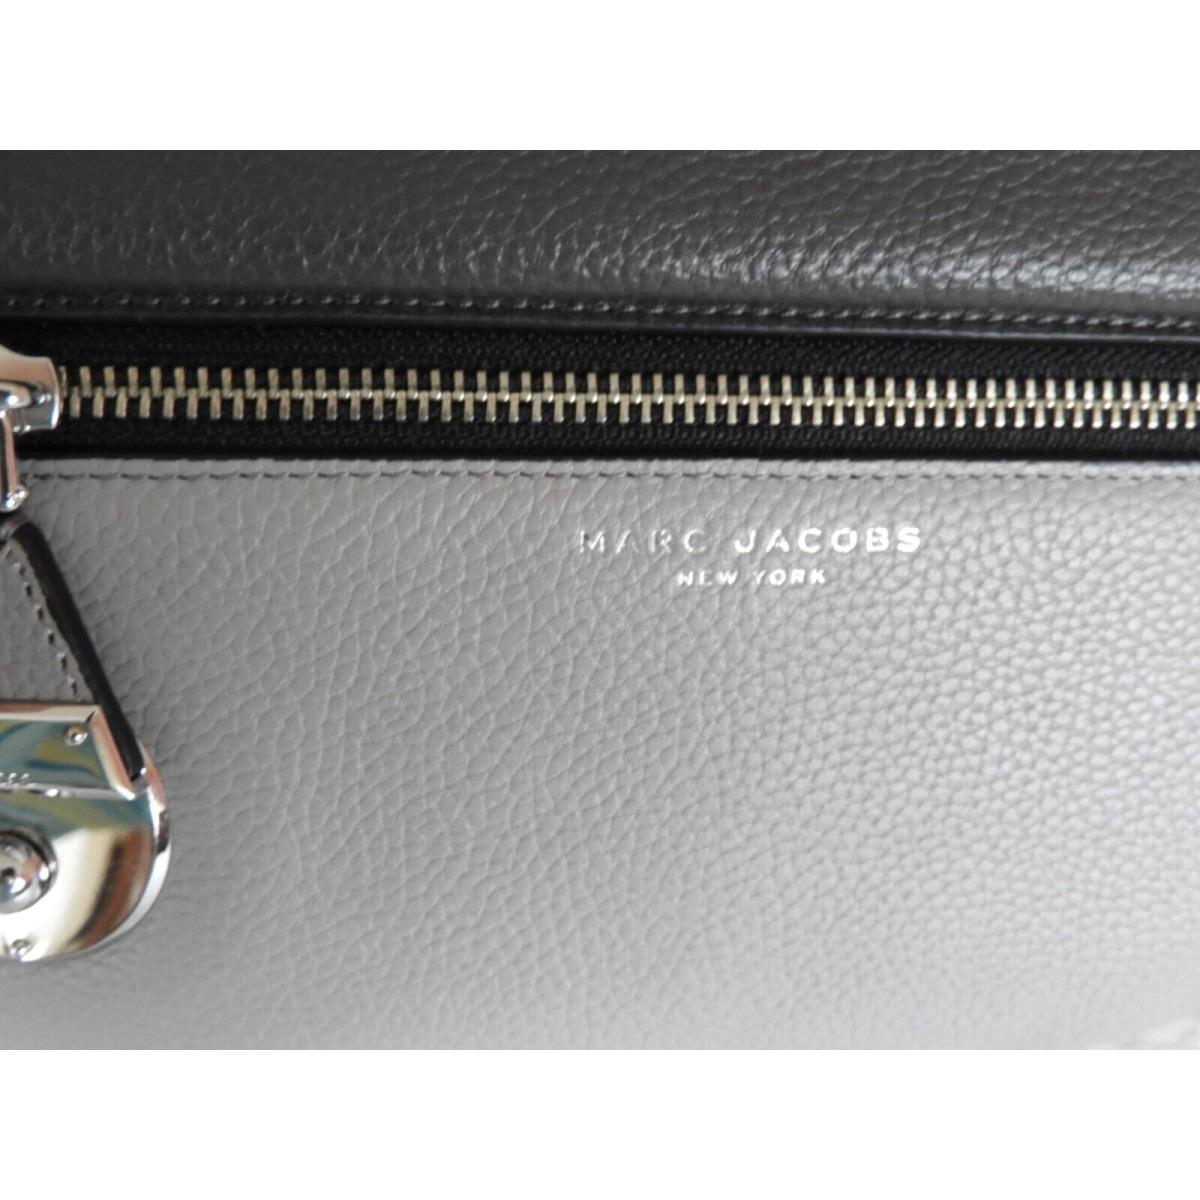 Marc Jacobs  bag   - Gray Handle/Strap, Silver Hardware, Black Lining 4